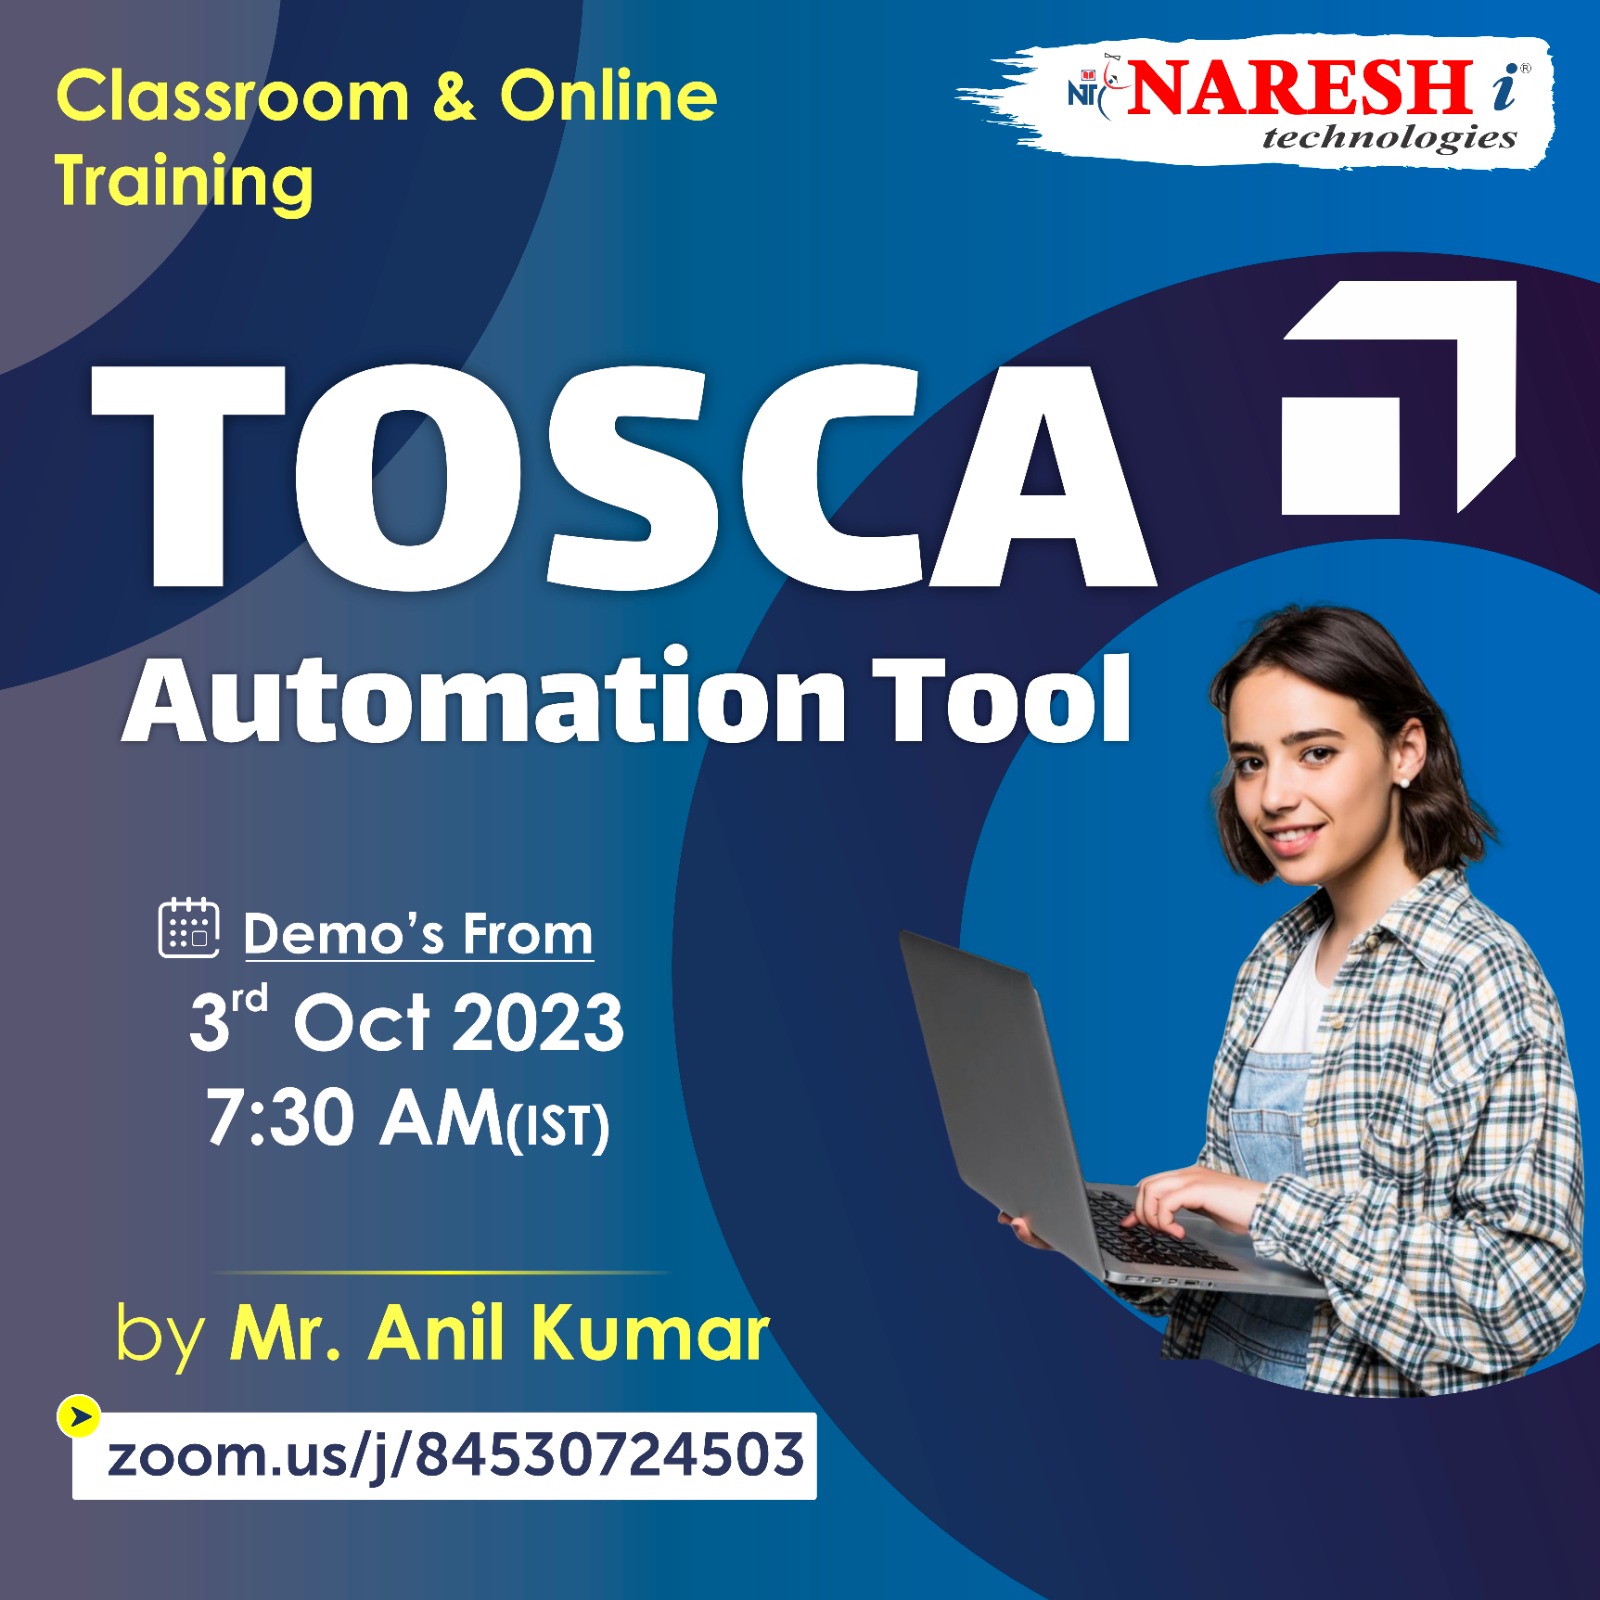 Free Demo On TOSCA Automation Training in NareshIT,Hyderabad,Services,Education & Classes,77traders